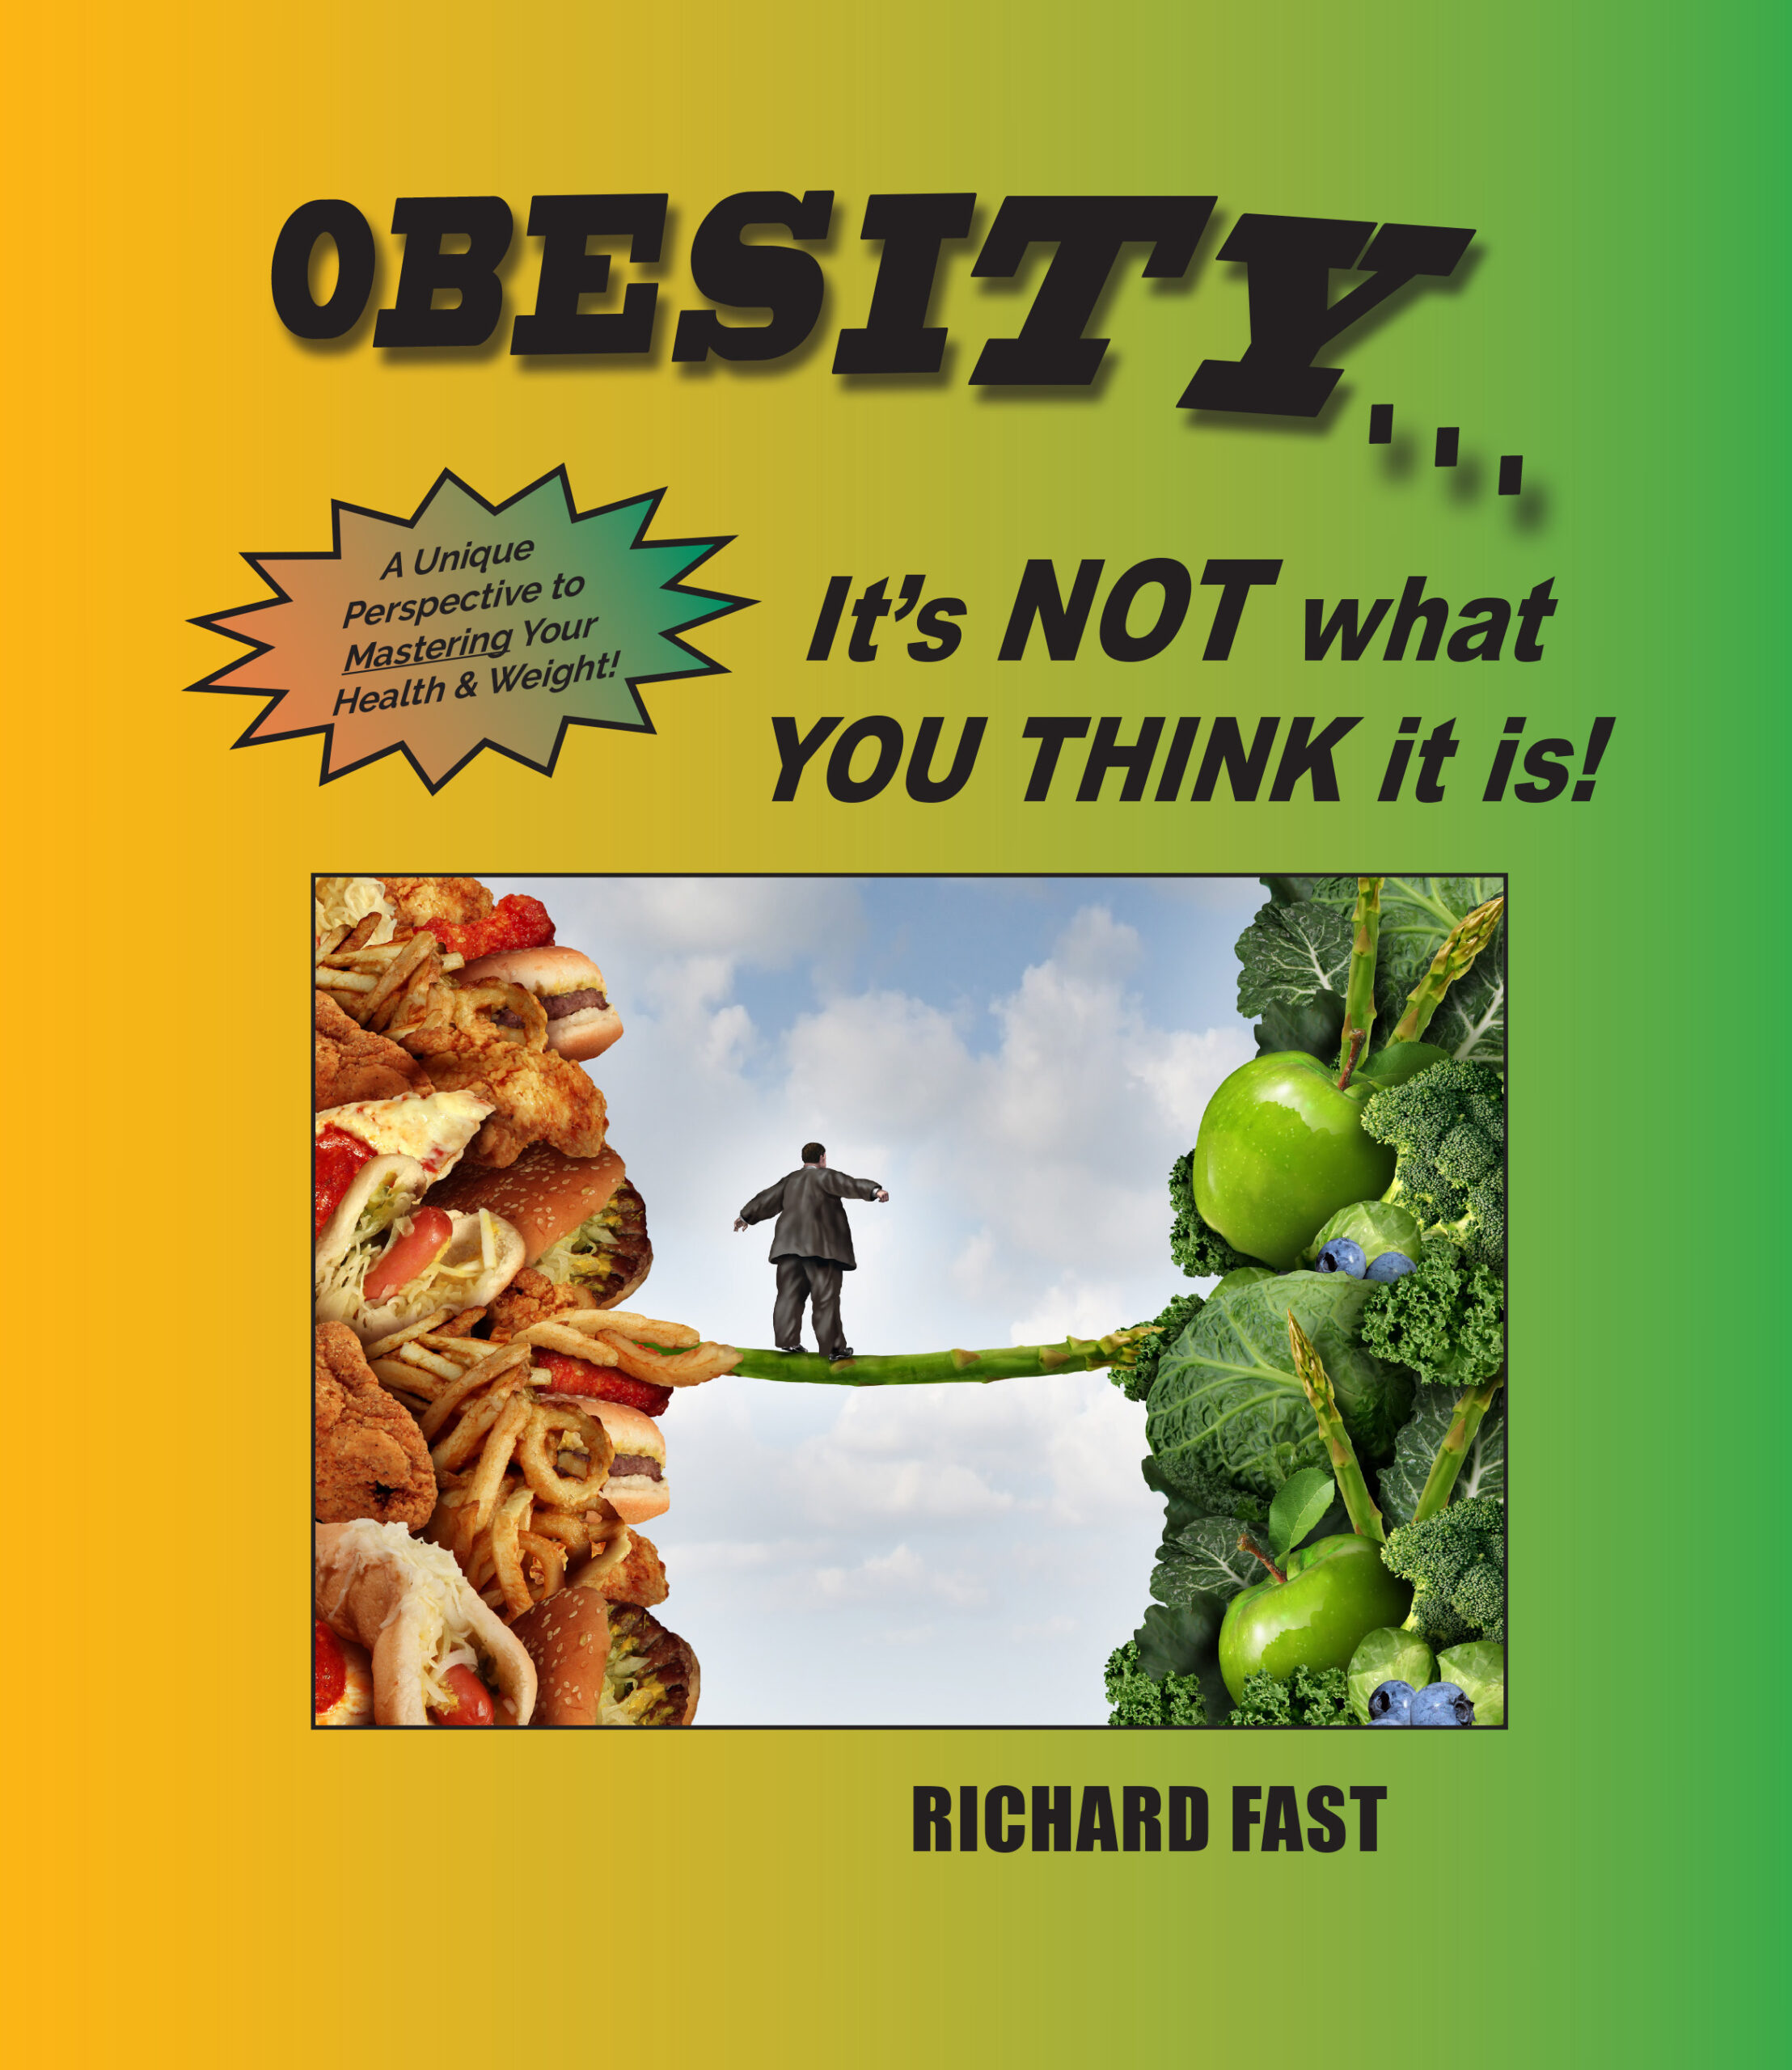 Obesity: It’s Not What You Think It Is! by Richard Fast